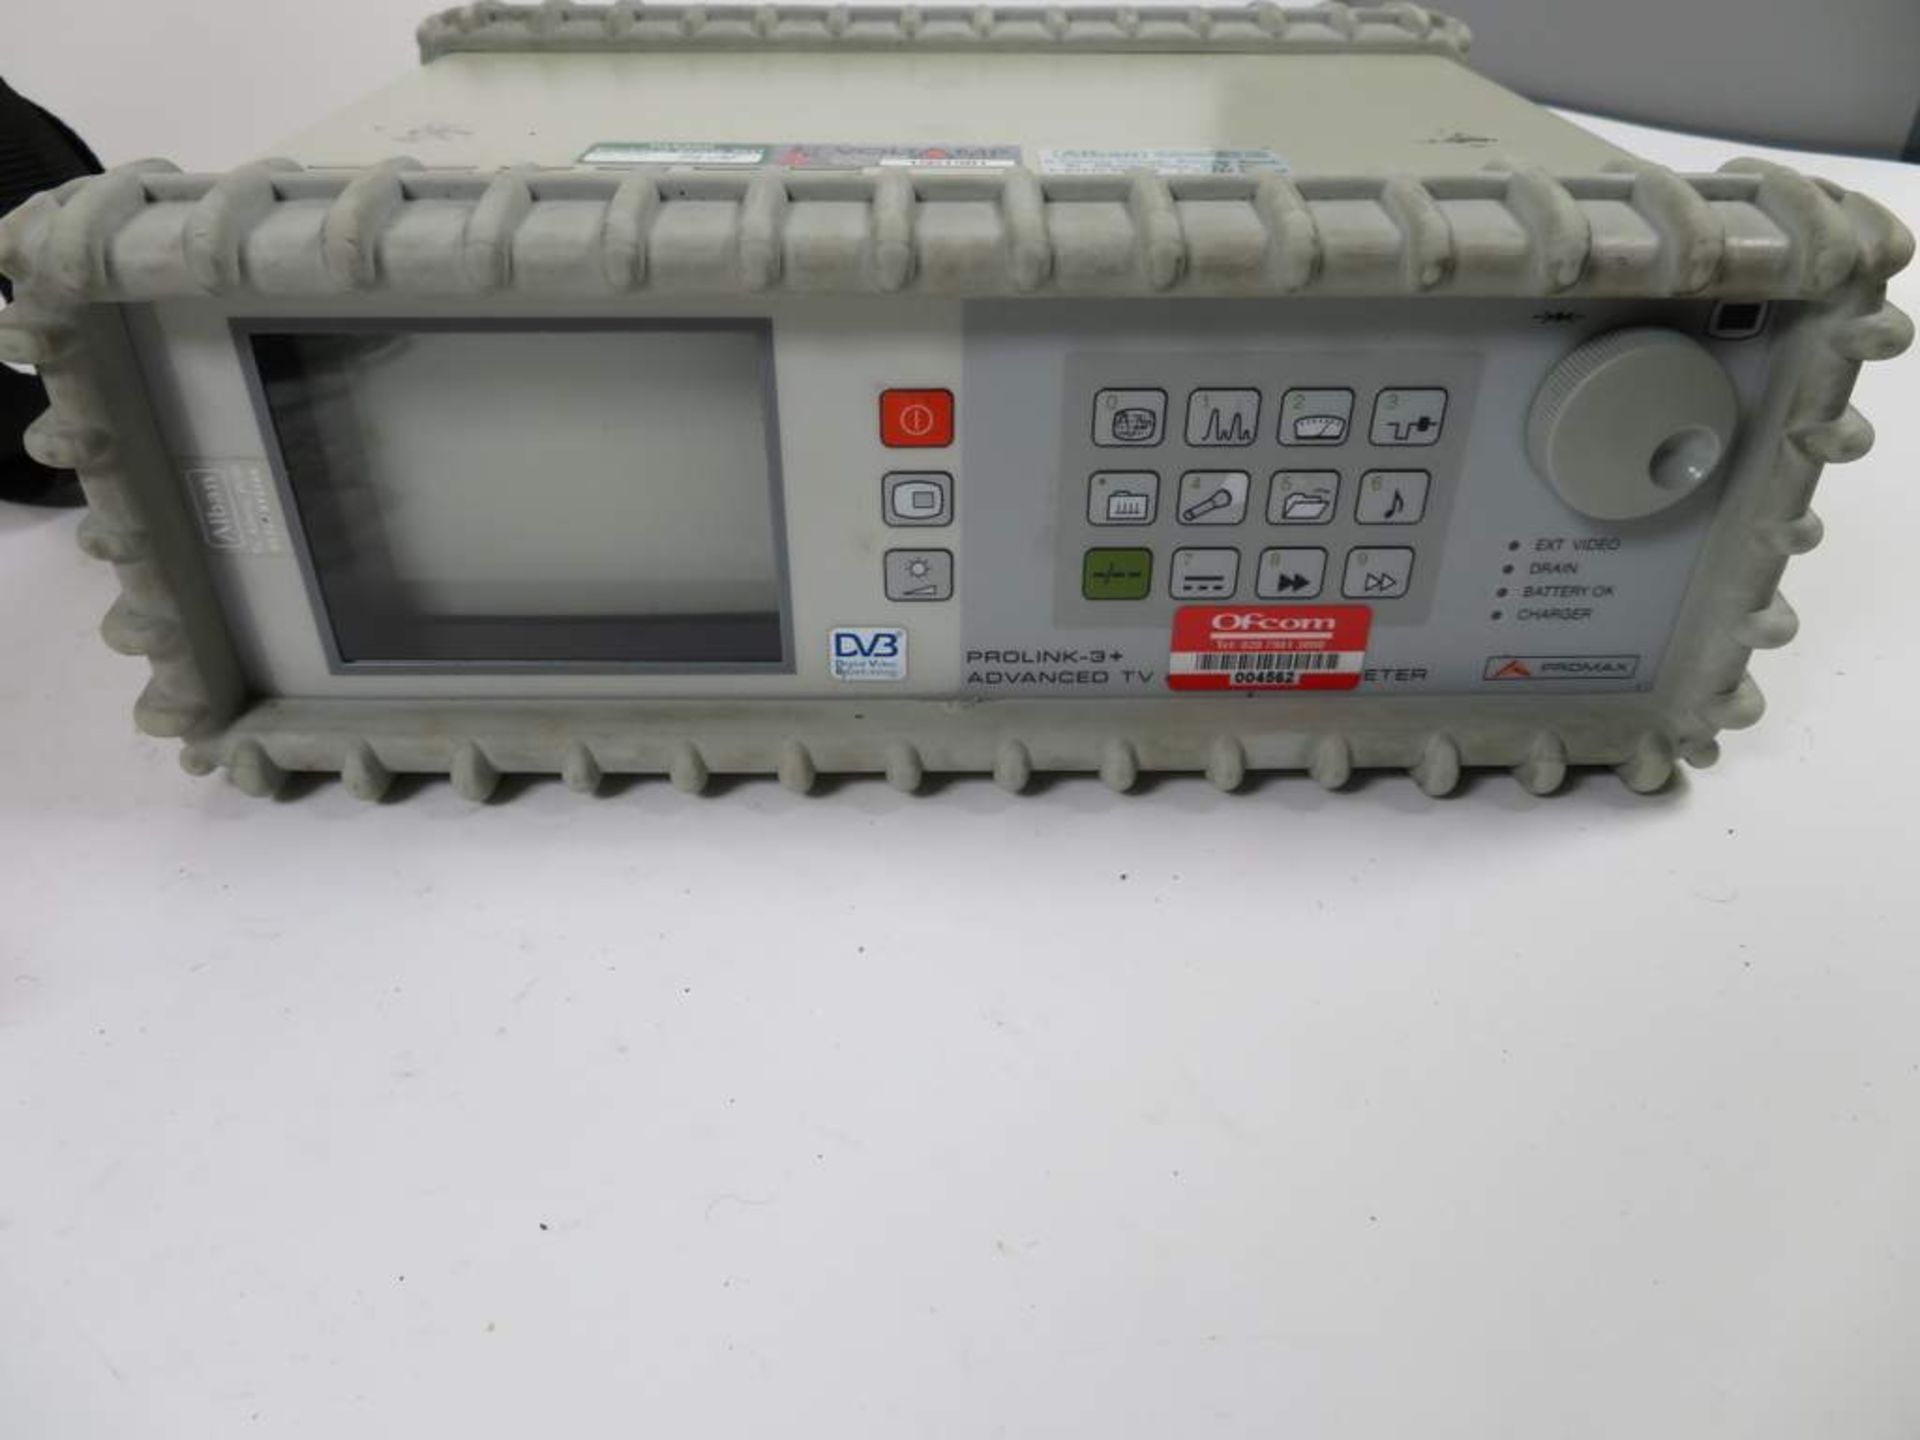 Promax Prolink-3+ TV and Satellite Signal Level Meter - Image 2 of 5